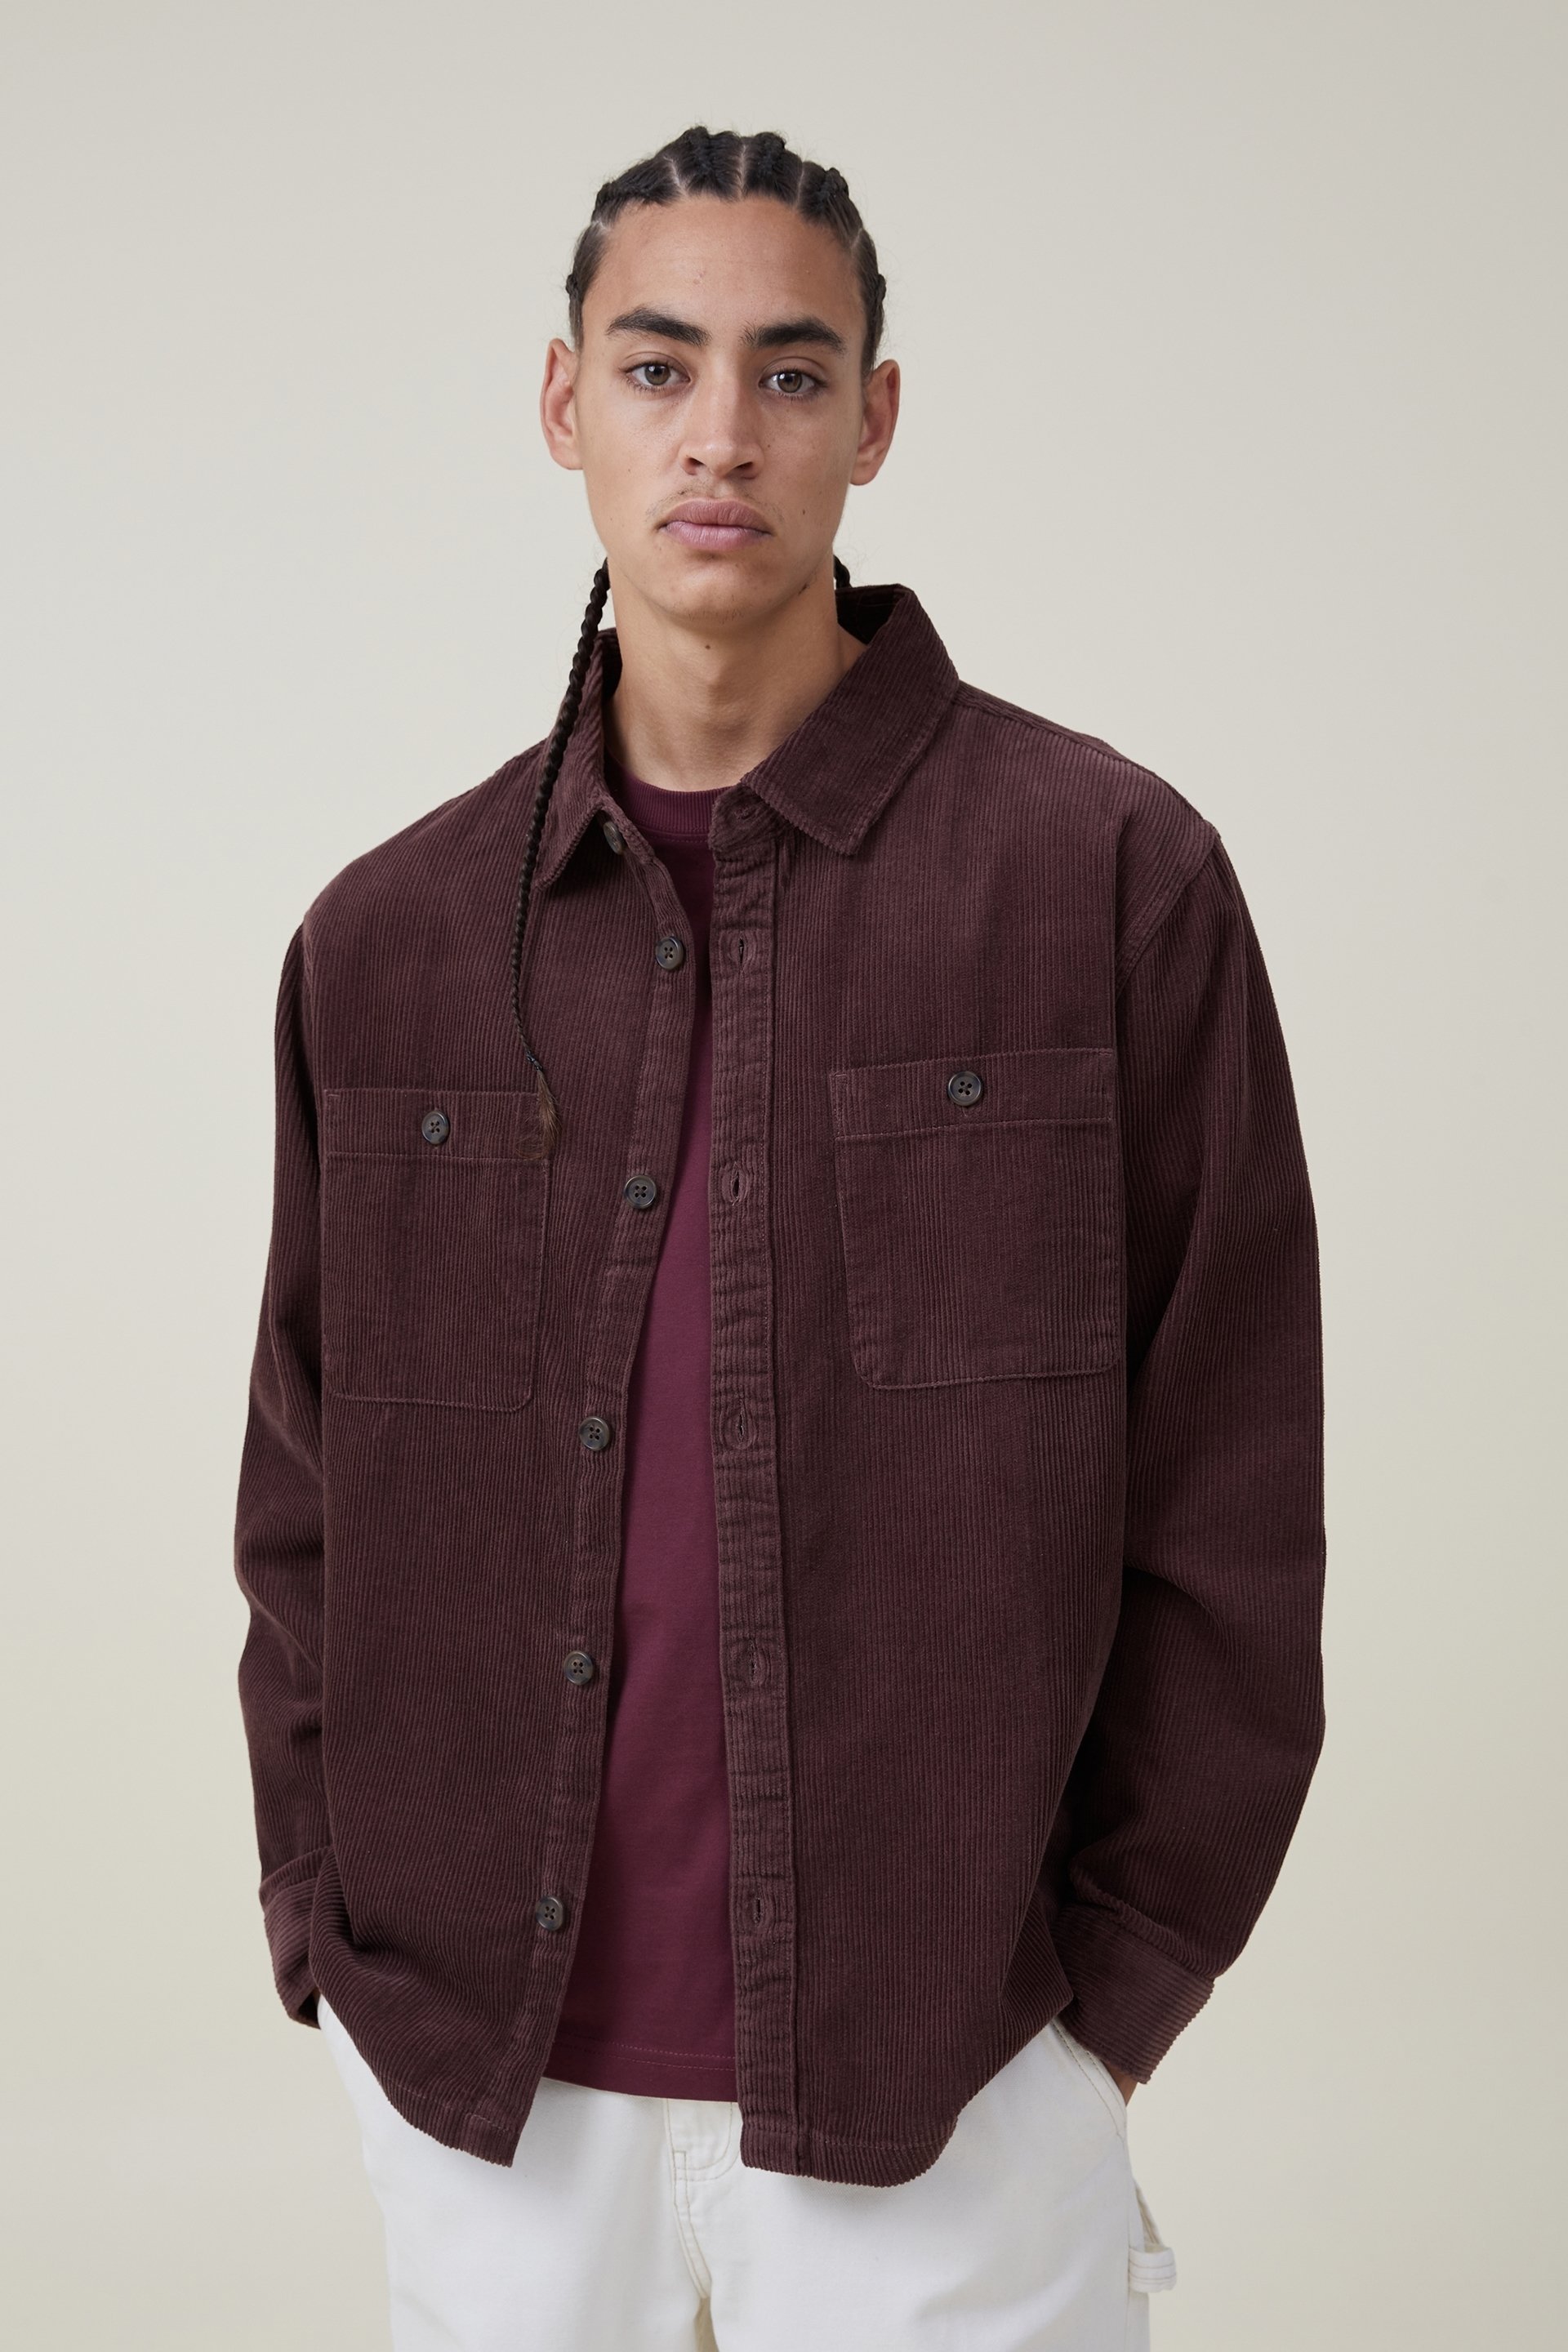 Cotton On Men - Heavy Overshirt - Coco brown cord